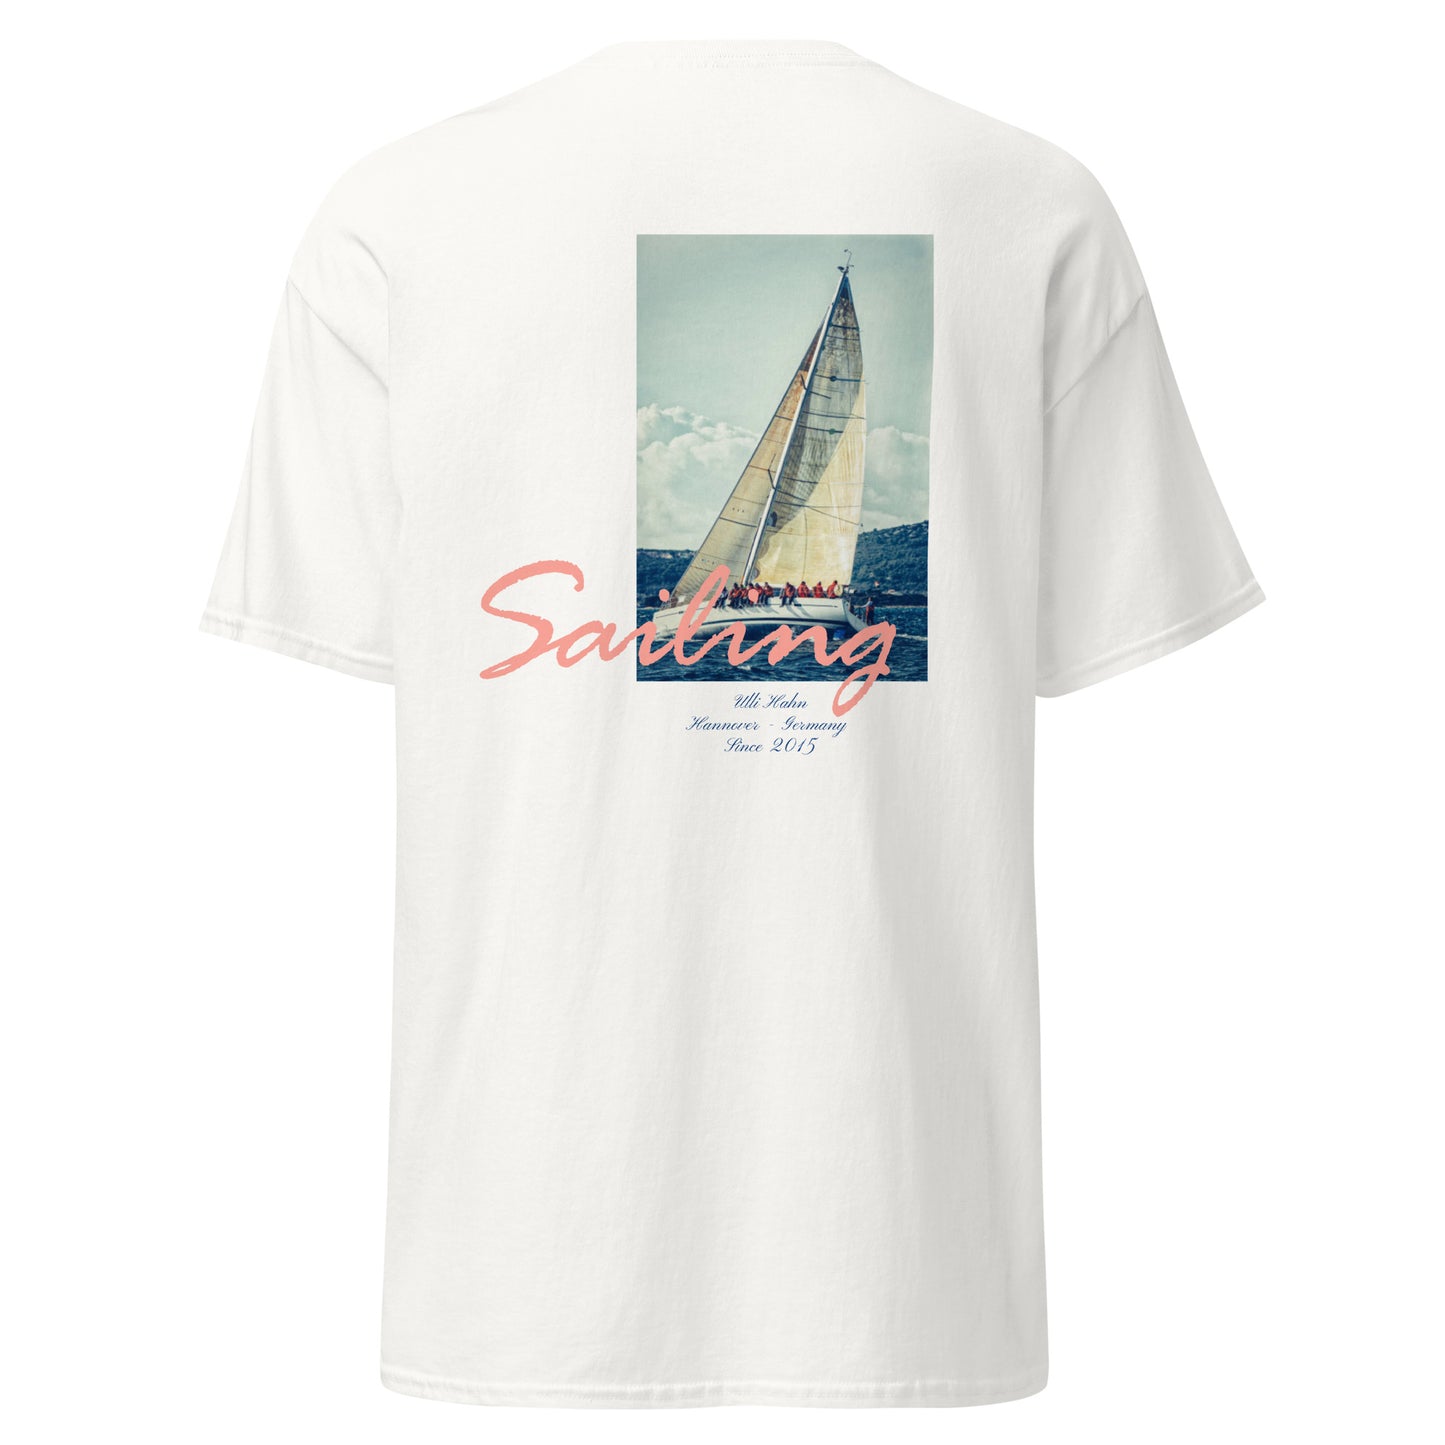 Ulli Hahn Line Collection Sailling T-Shirt